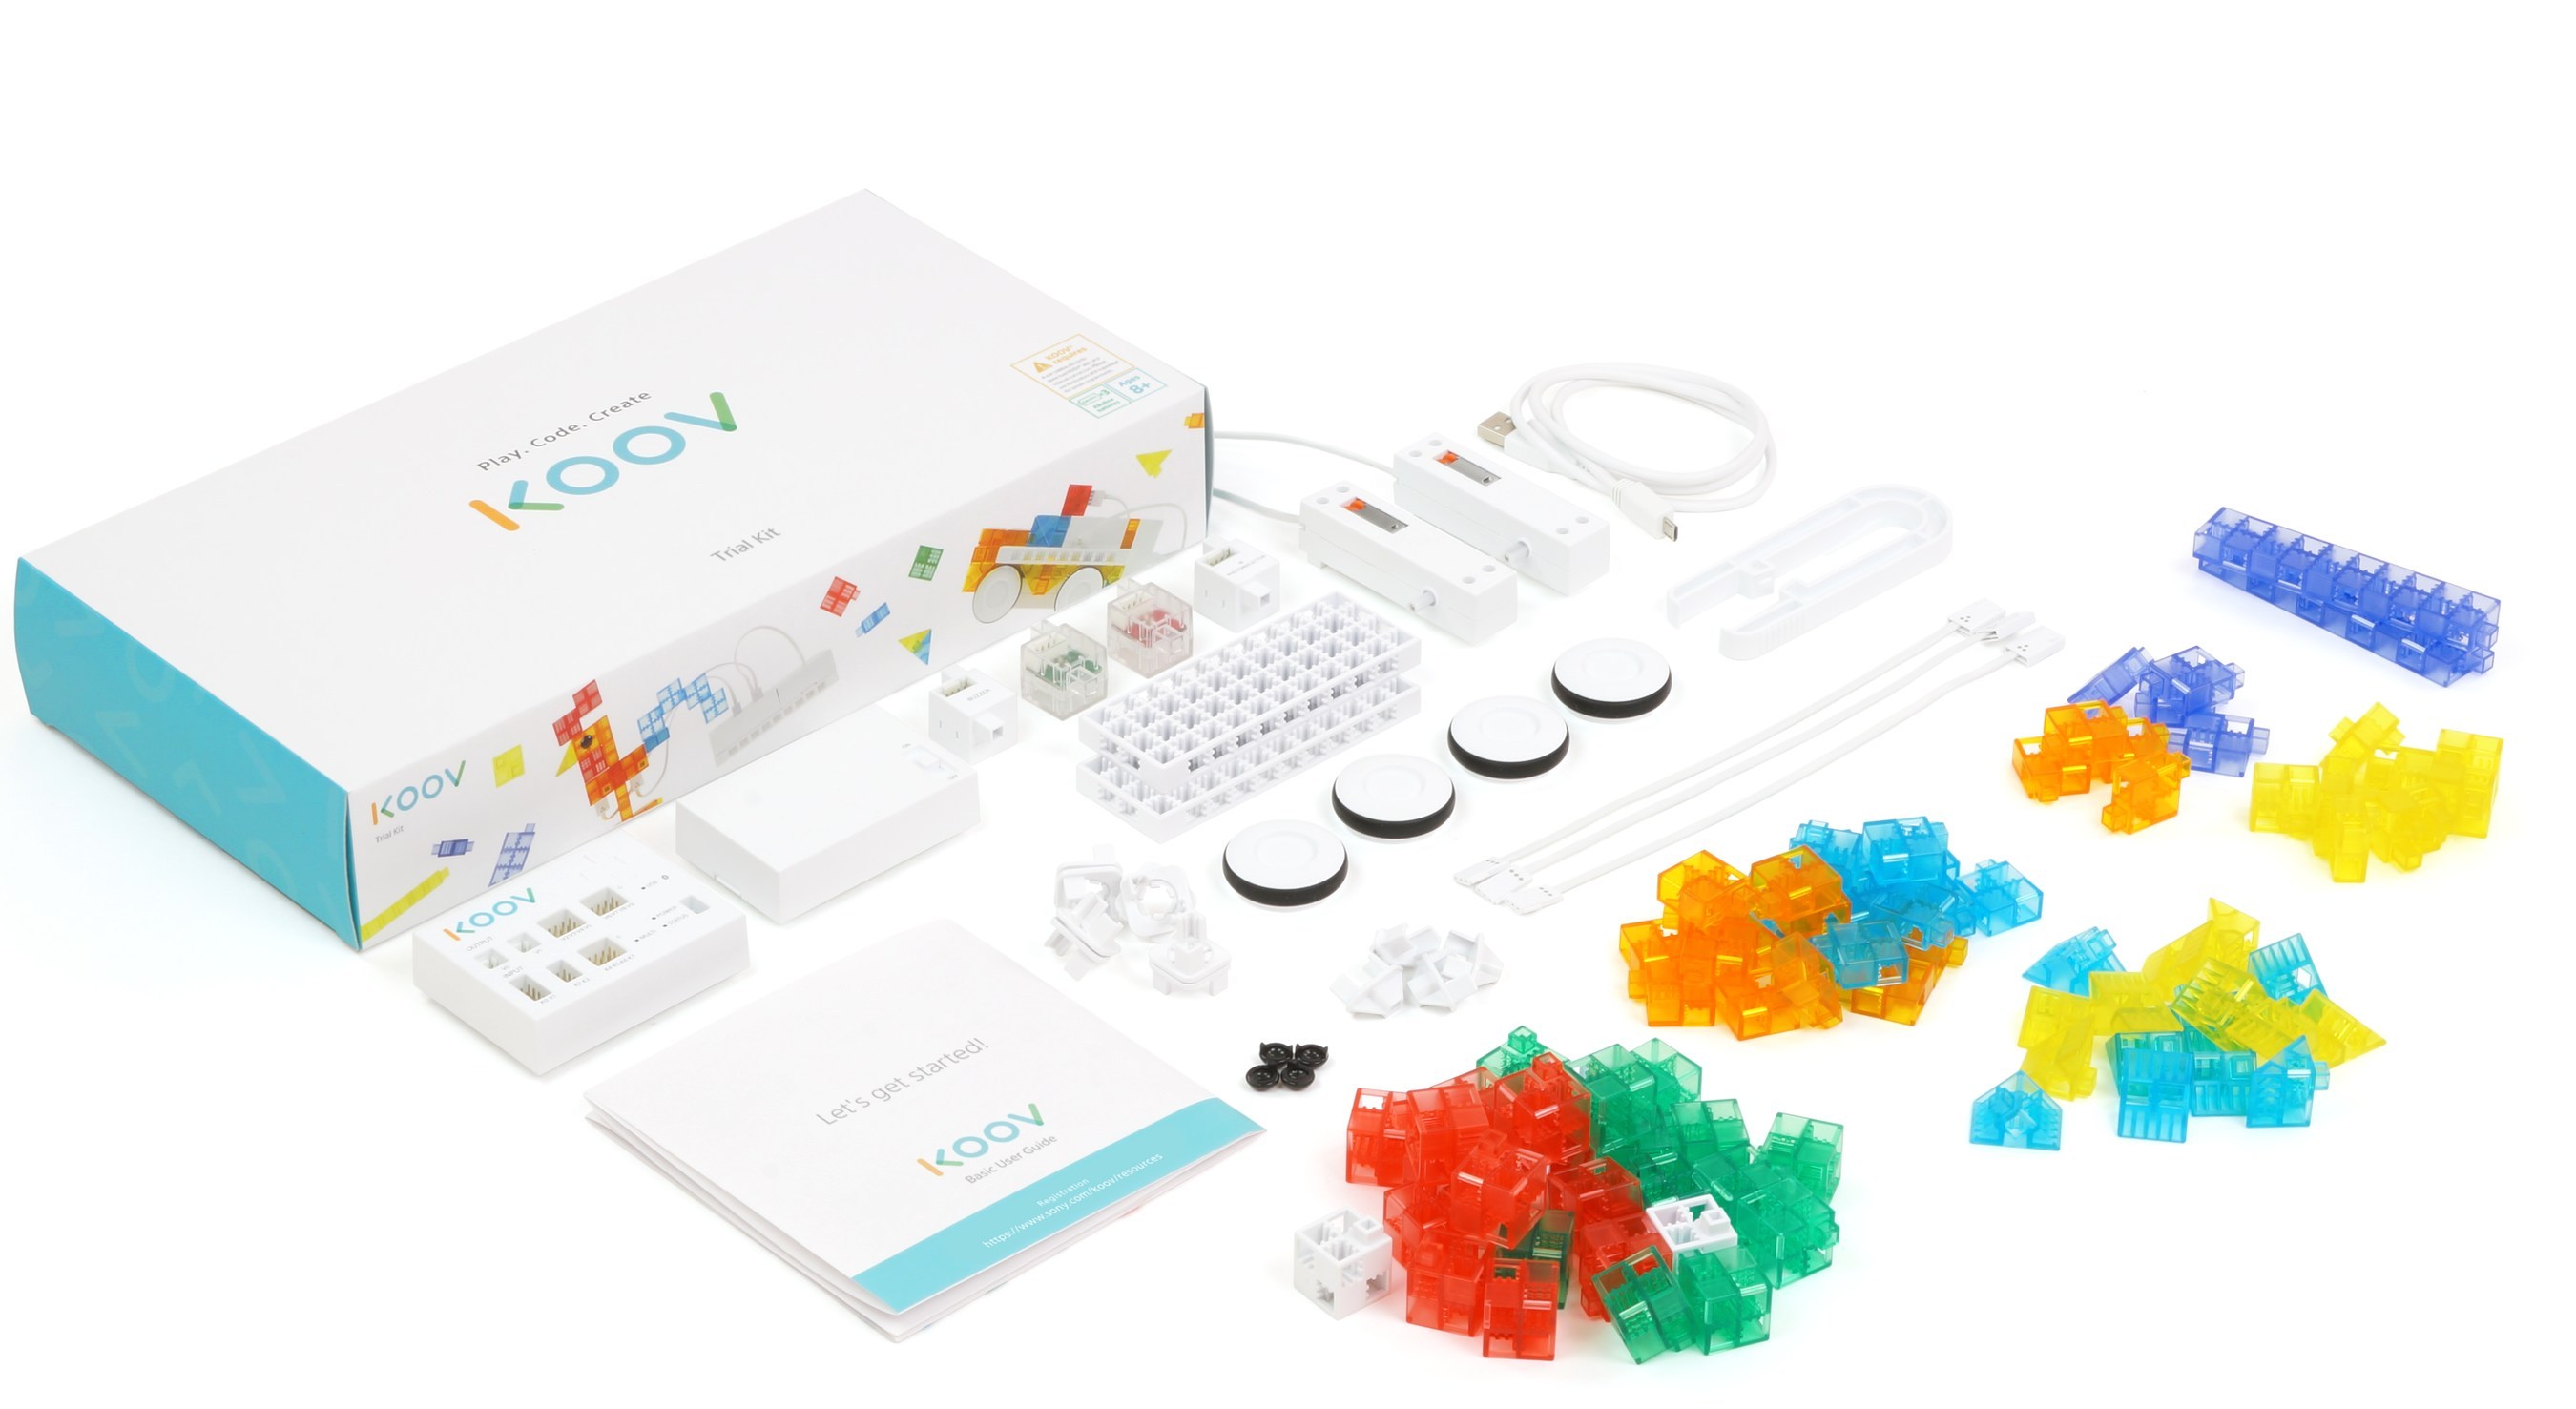 Sony Adds a Second Coding, Robotics and Design Kit Option To its STEAM Education Offerings